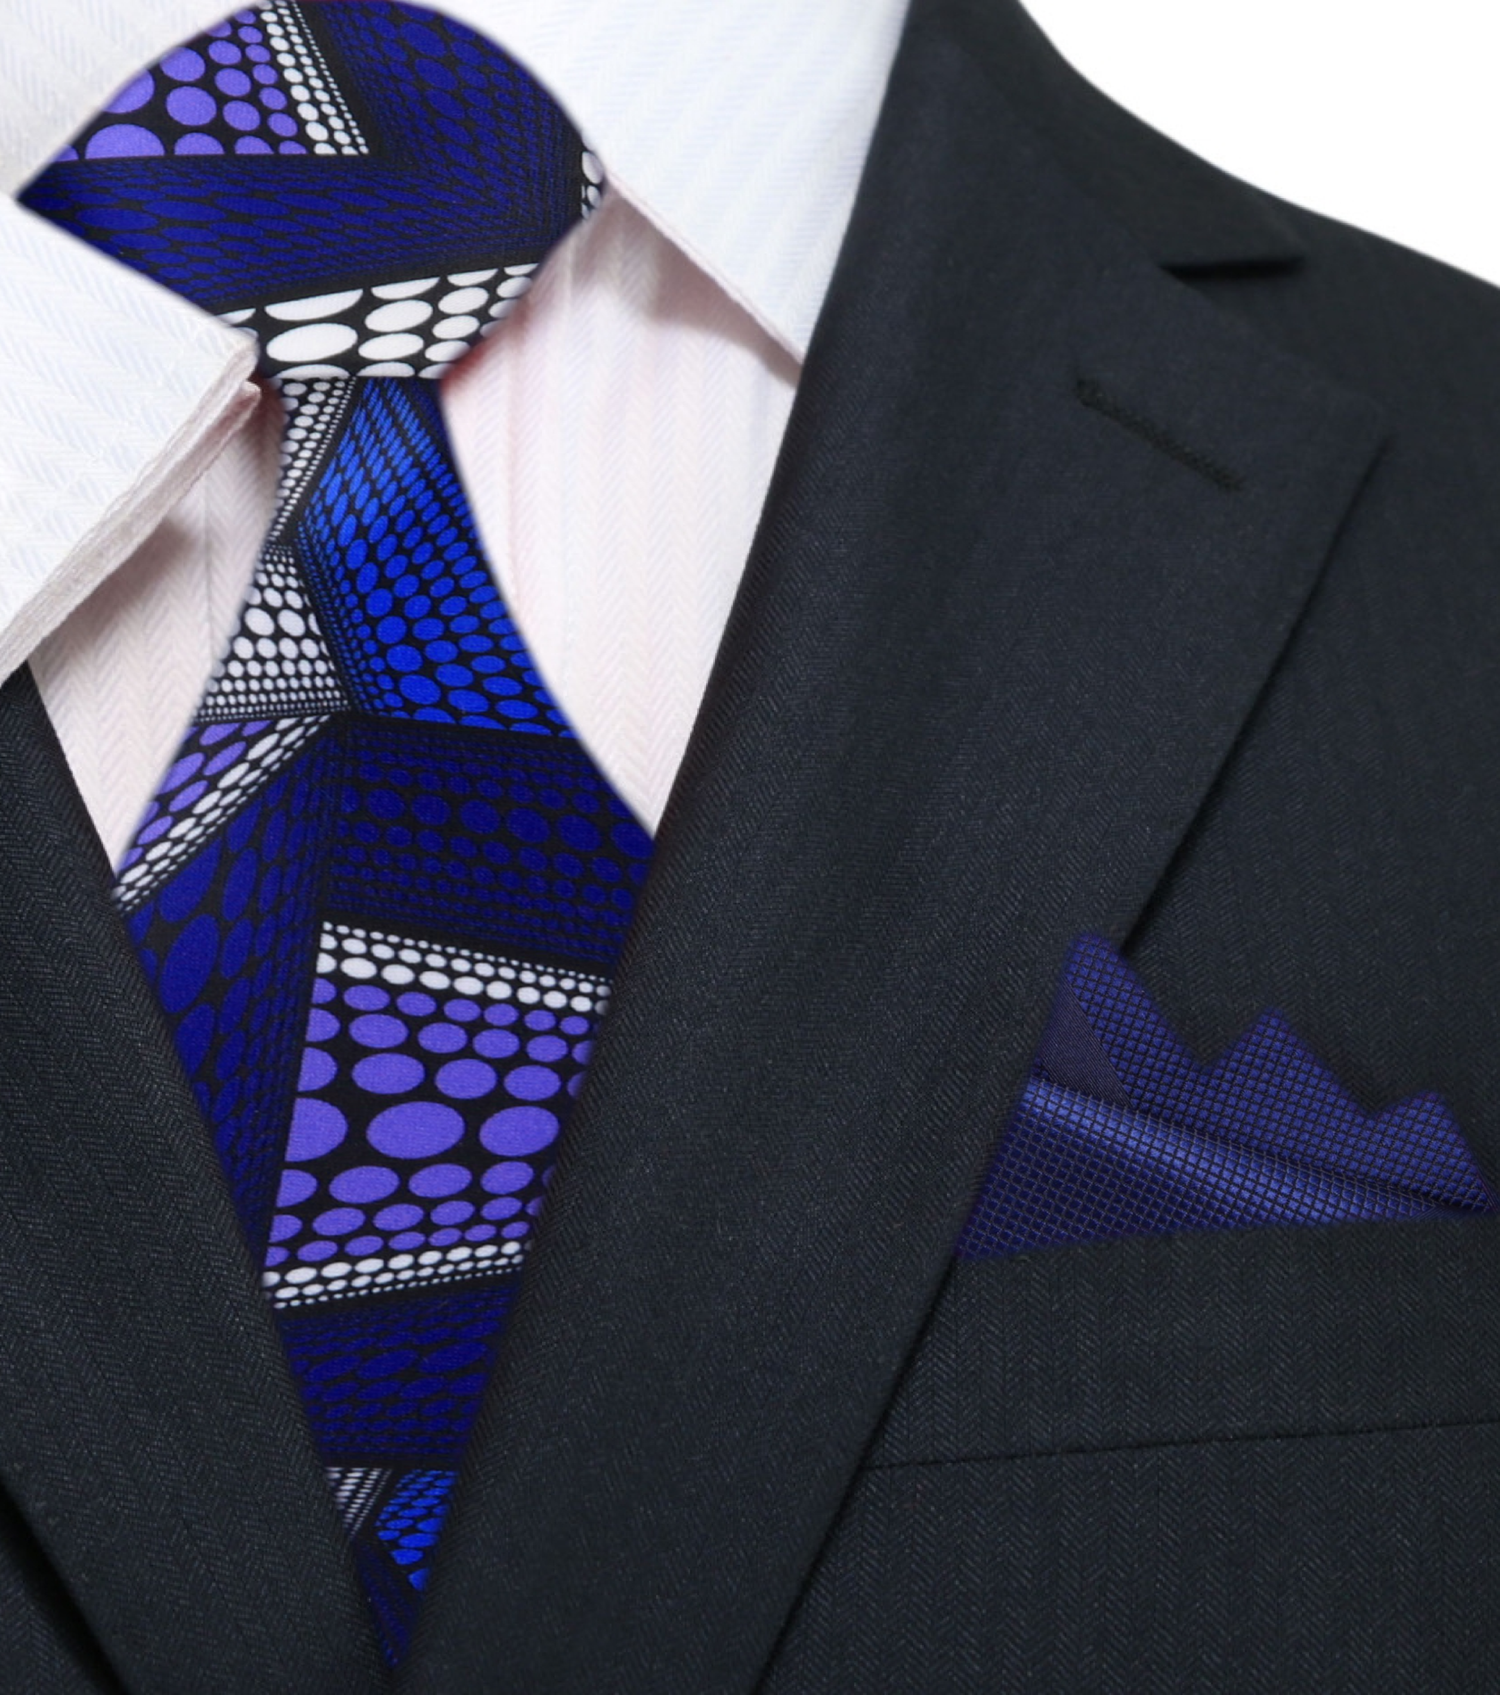 Main: Blue, Purple, White Abstract Polka Pattern Necktie with a Blue Stripe Texture Square